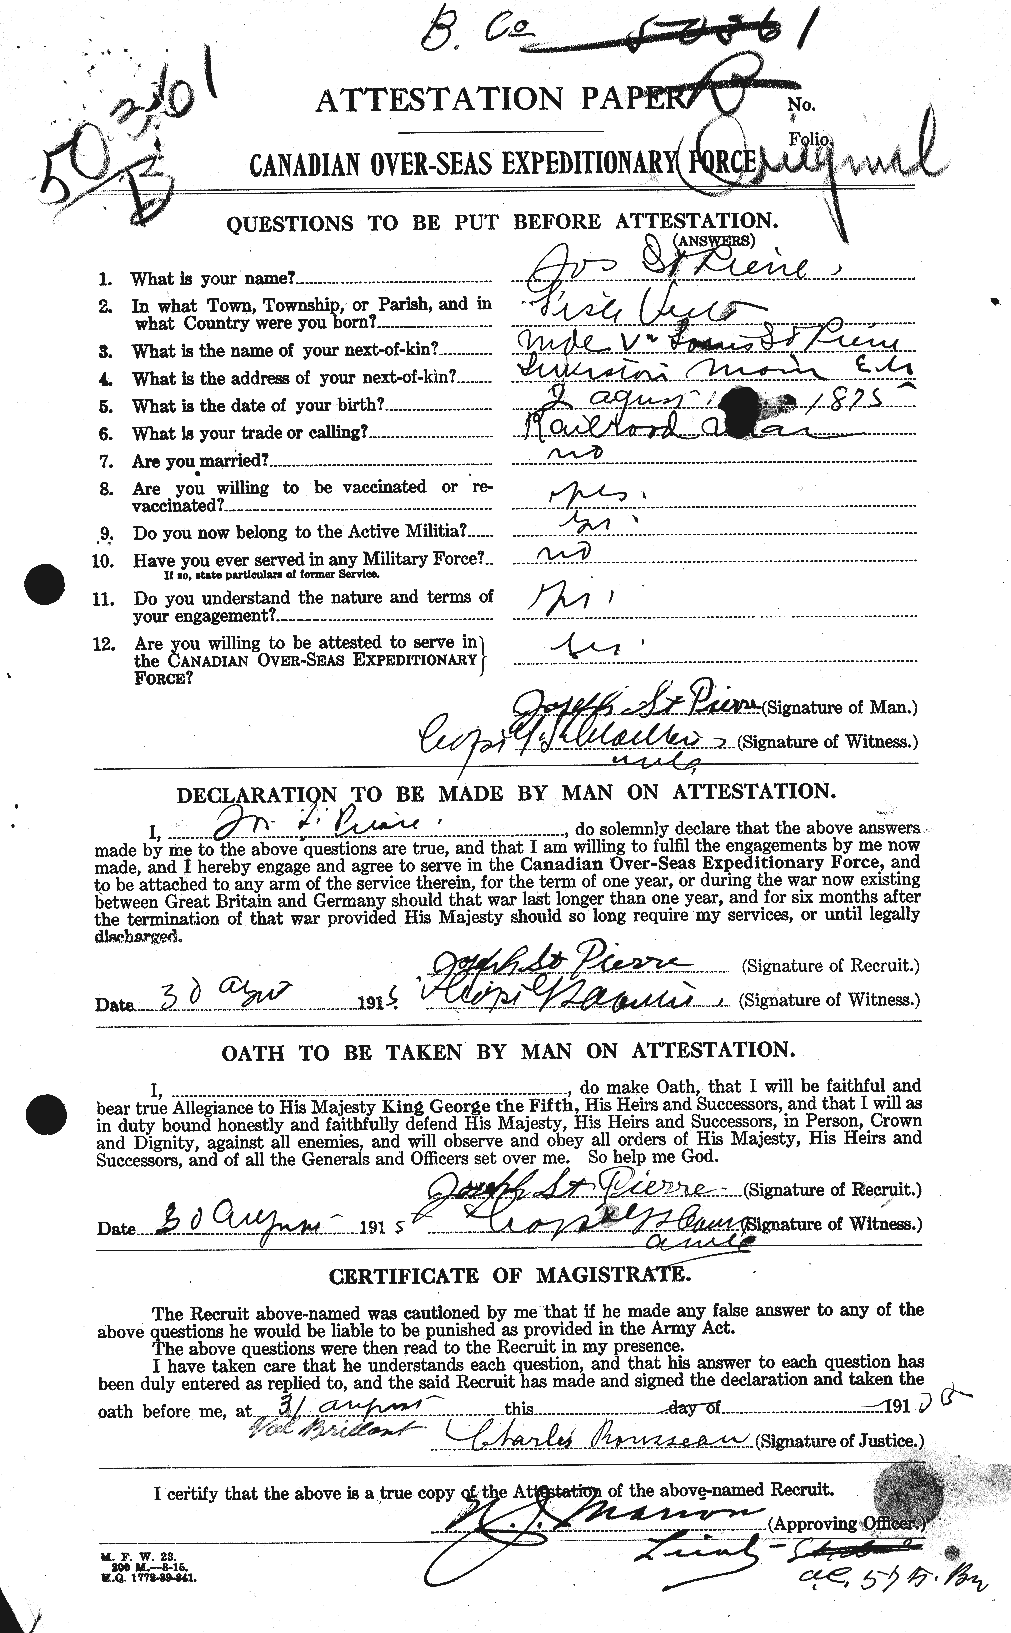 Personnel Records of the First World War - CEF 077680a